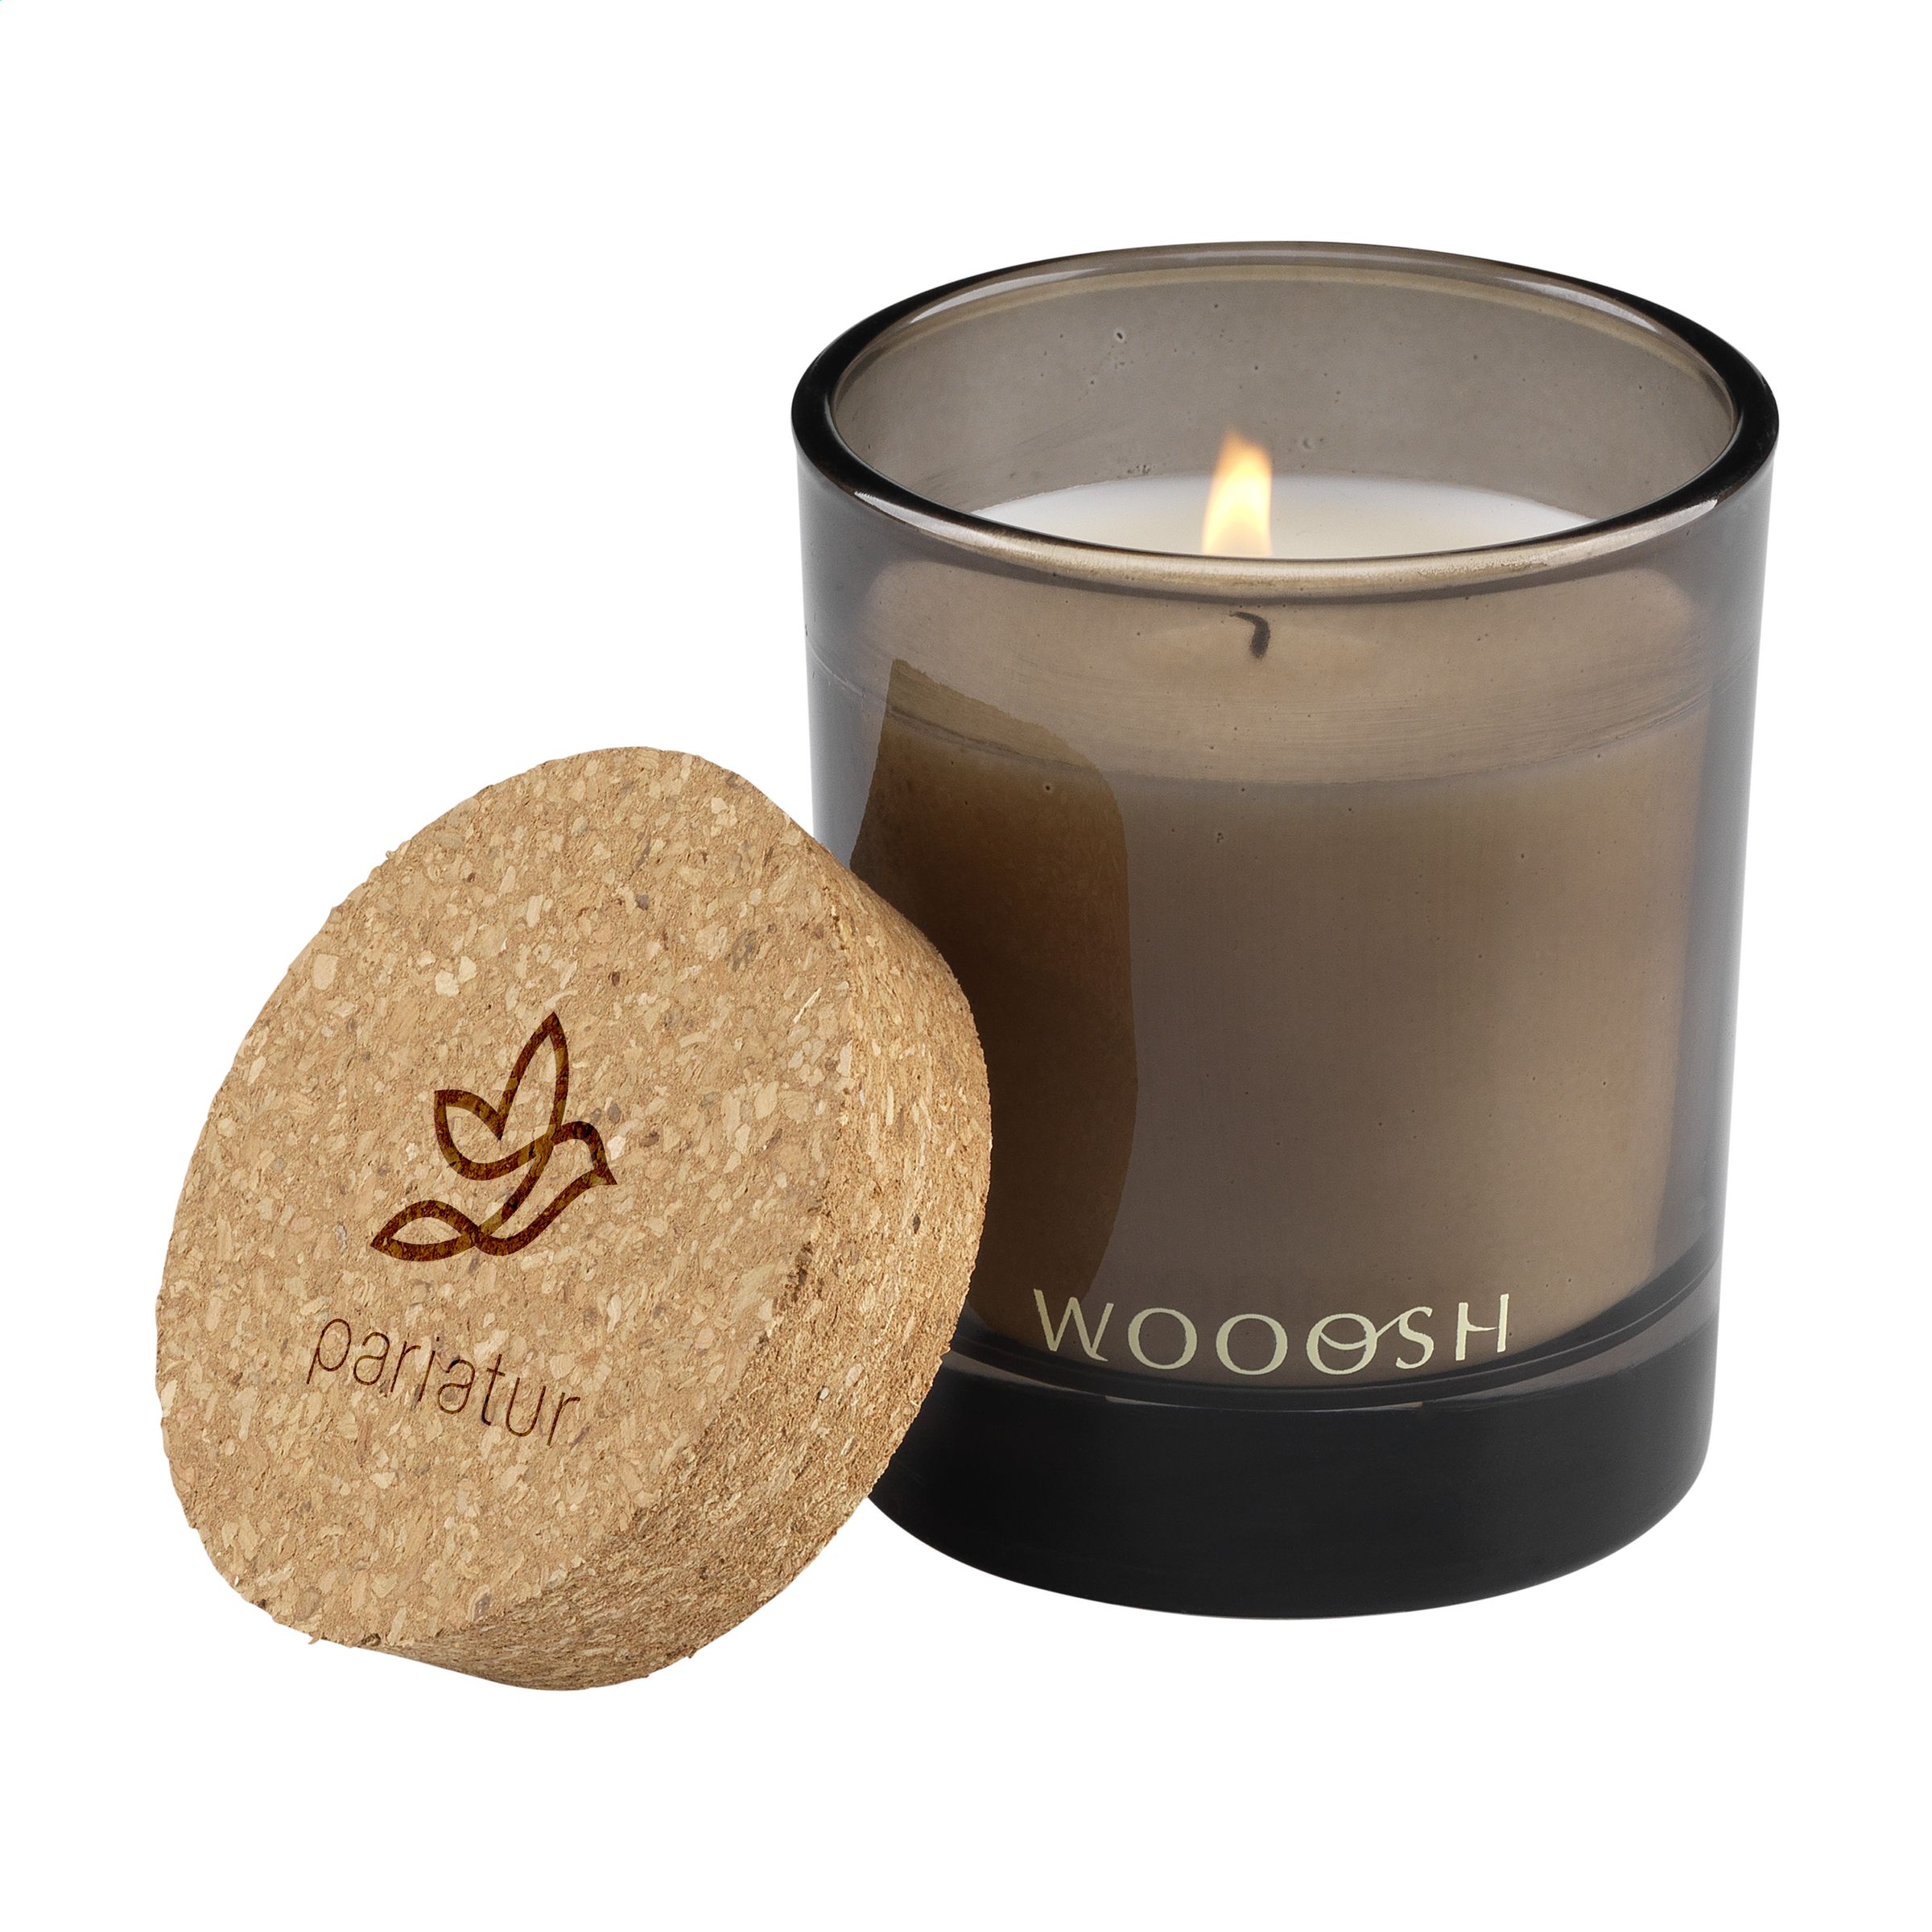 Wooosh Scented Candle in Glass Jar - Manor Park